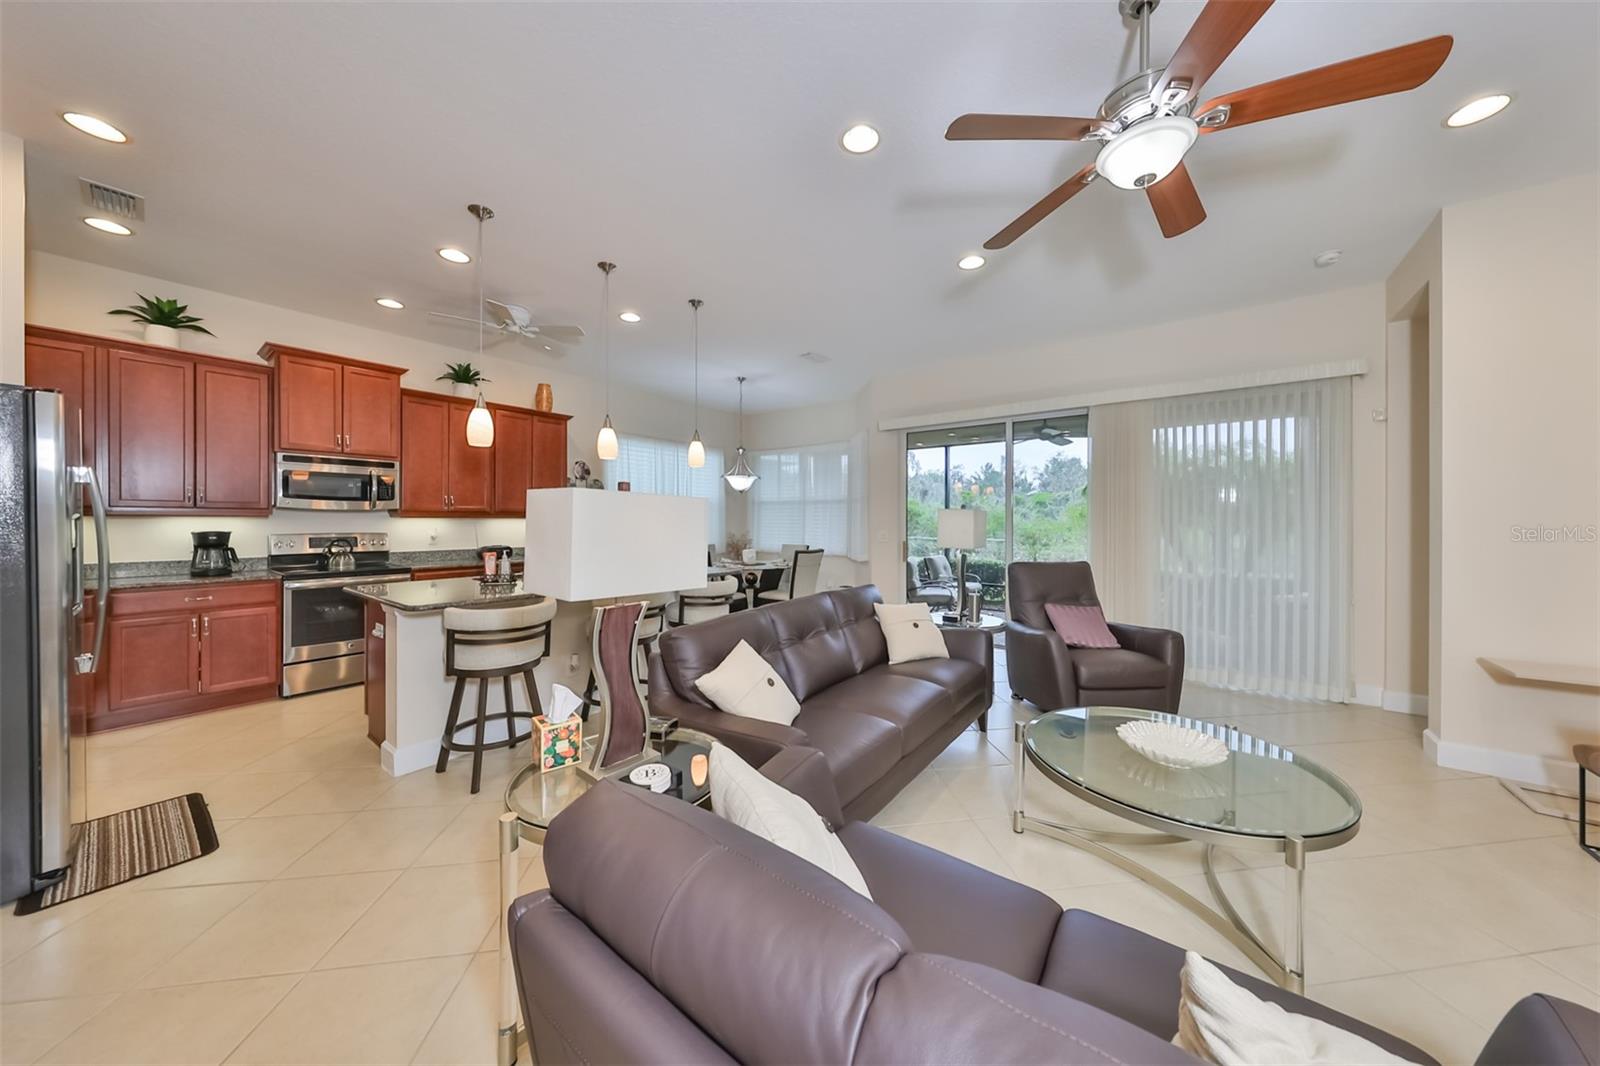 The living room is open to the spacious kitchen and has custom blinds throughout the home.  So you never miss out on the action.  And you have the views of the Manatee State Park from just about every room in the house.